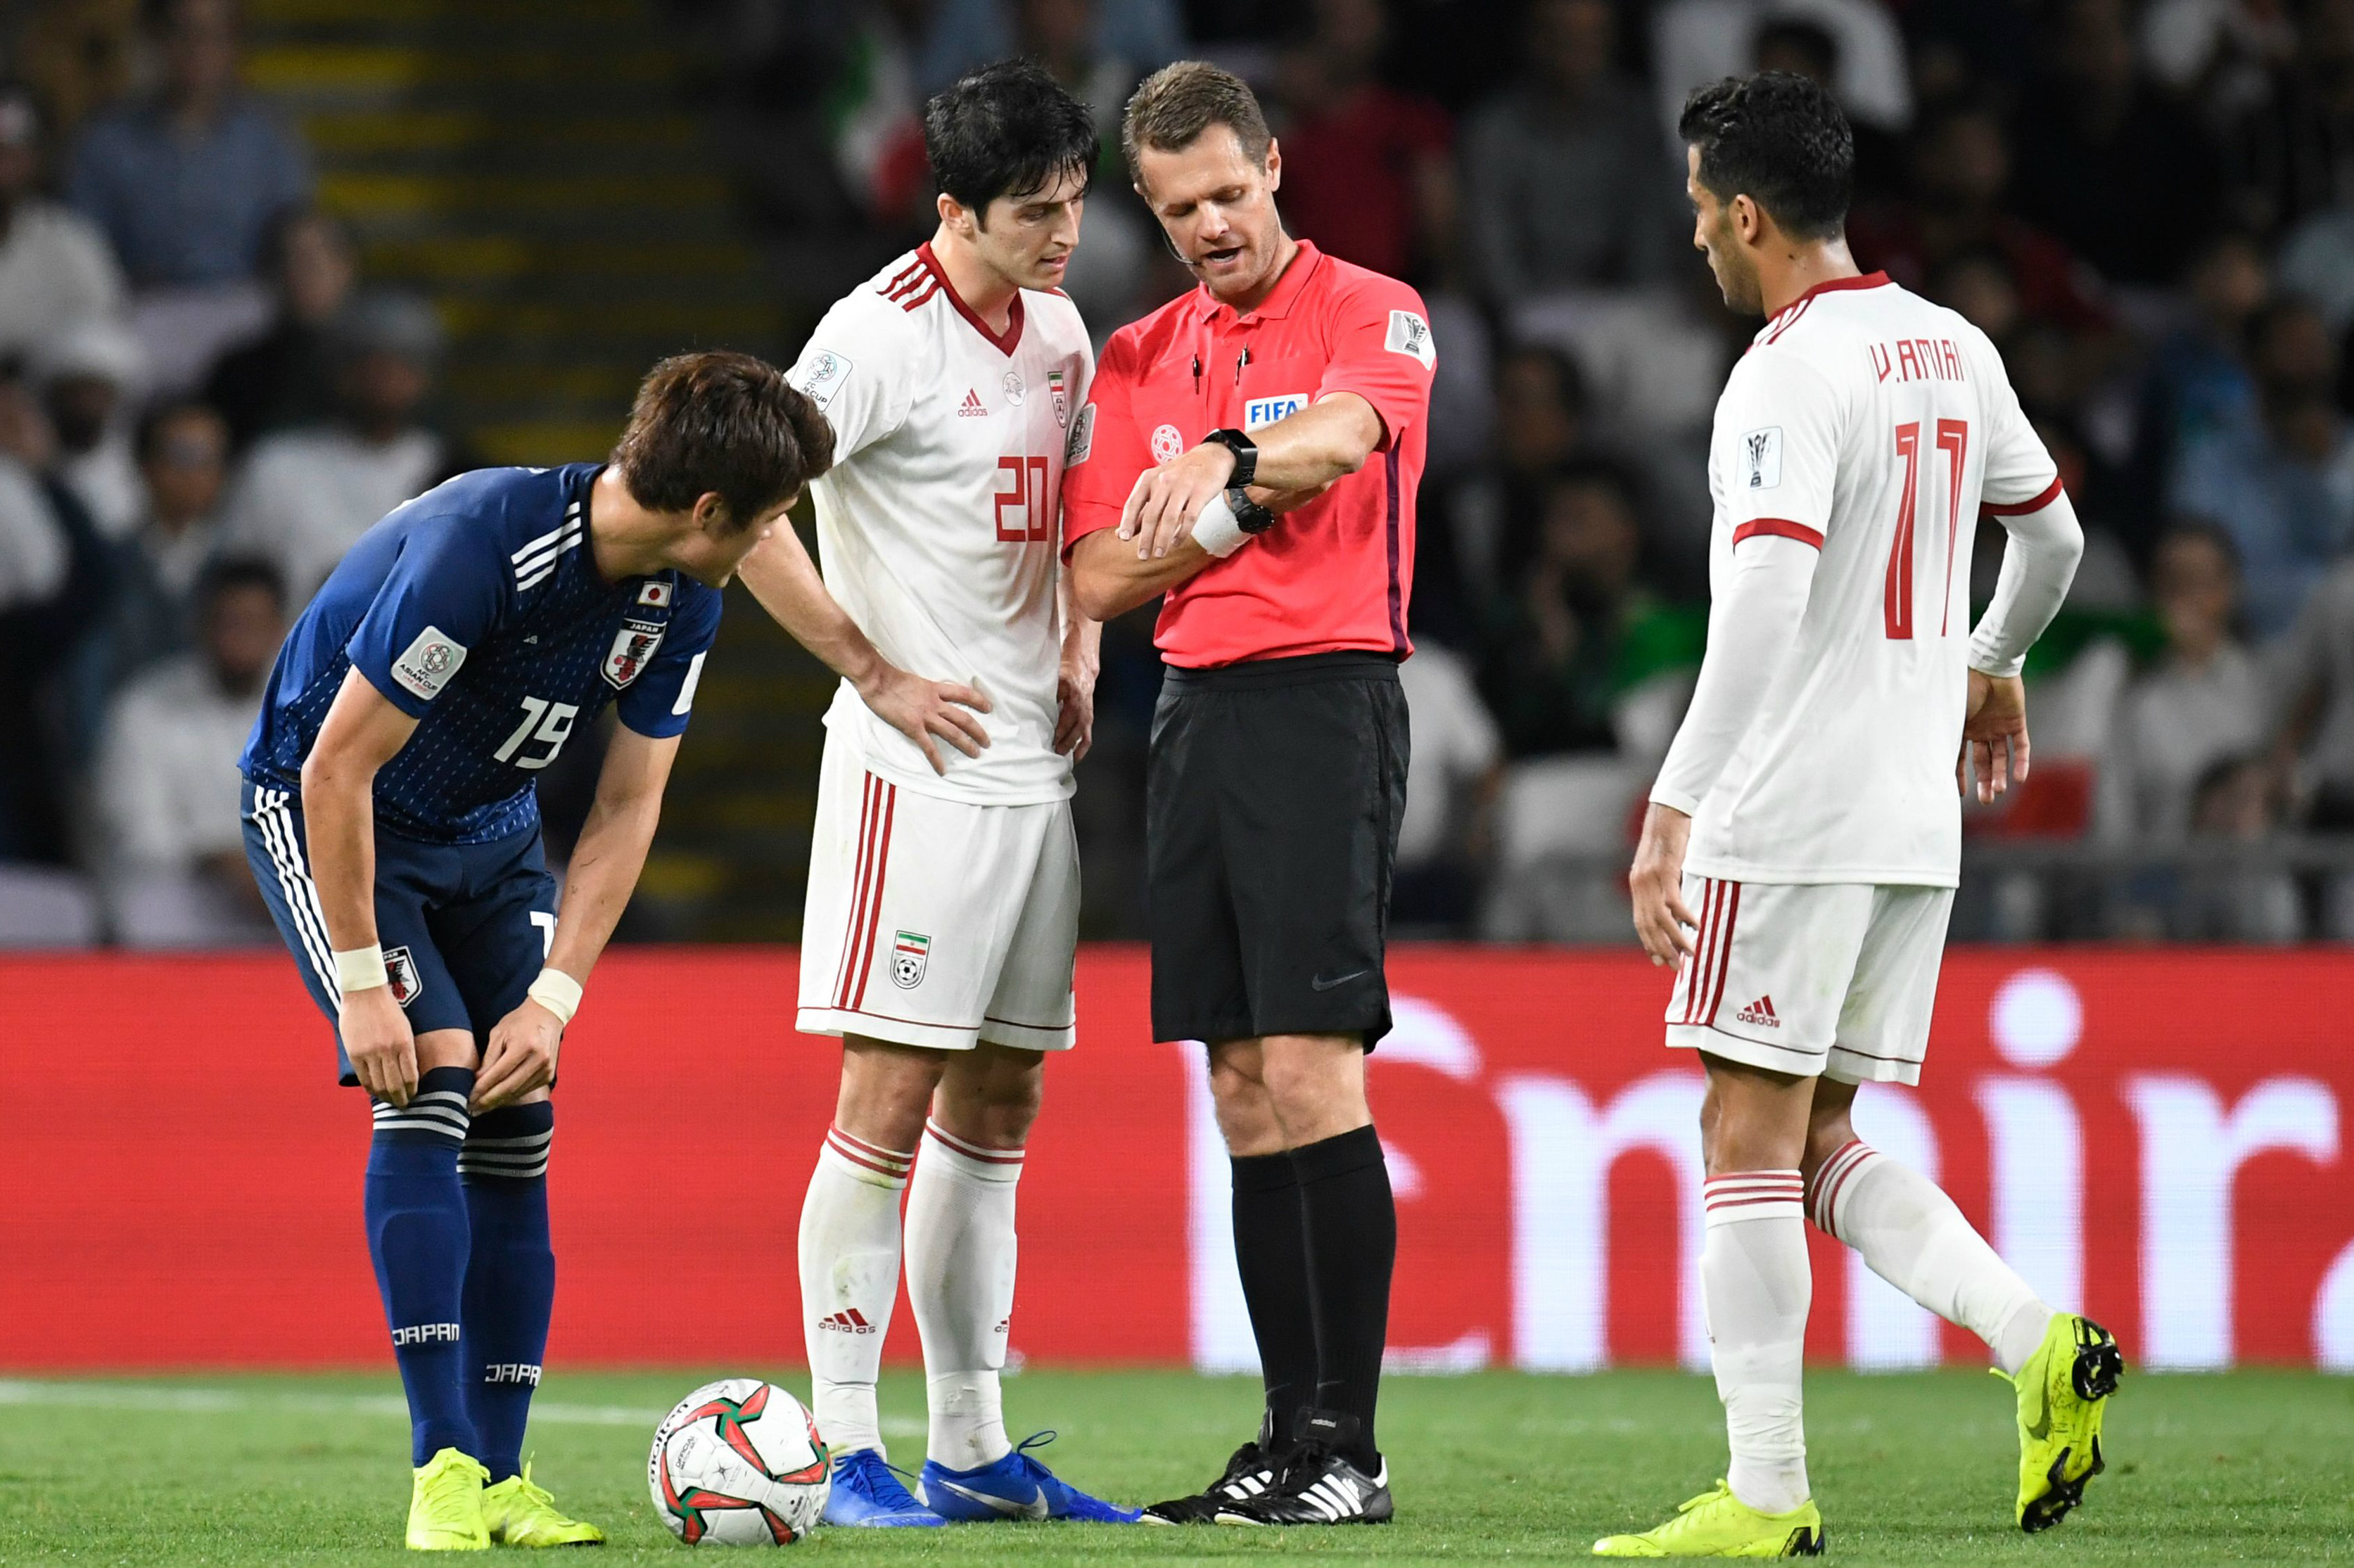 Chris Beath officiating at the 2019 AFC Asian Cup in the match between Iran and Japan